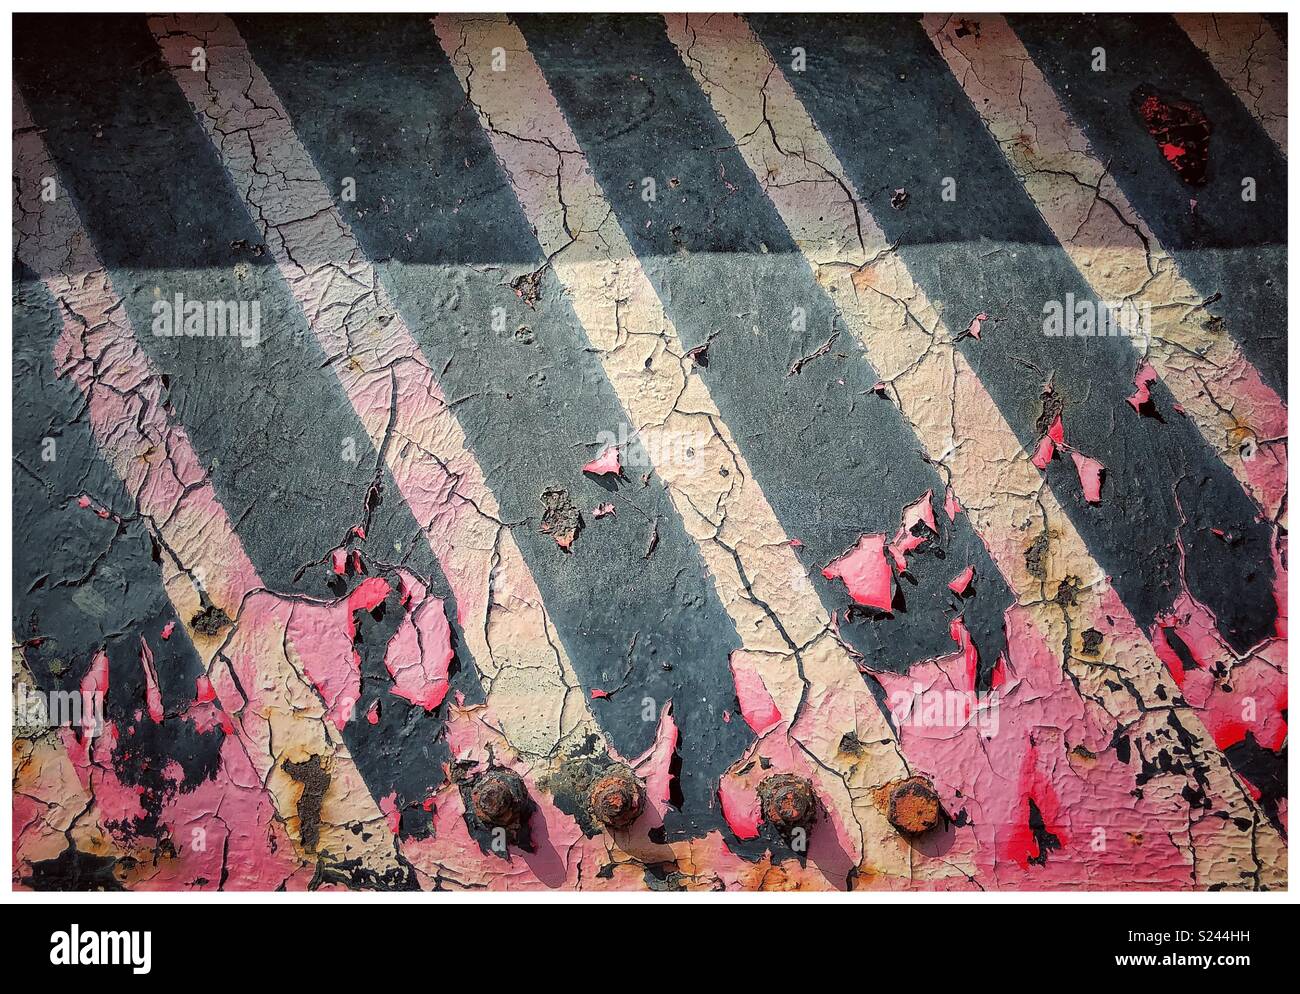 Abstract patterns - pink paint & blank & white stripes on cracked, metal surface Stock Photo